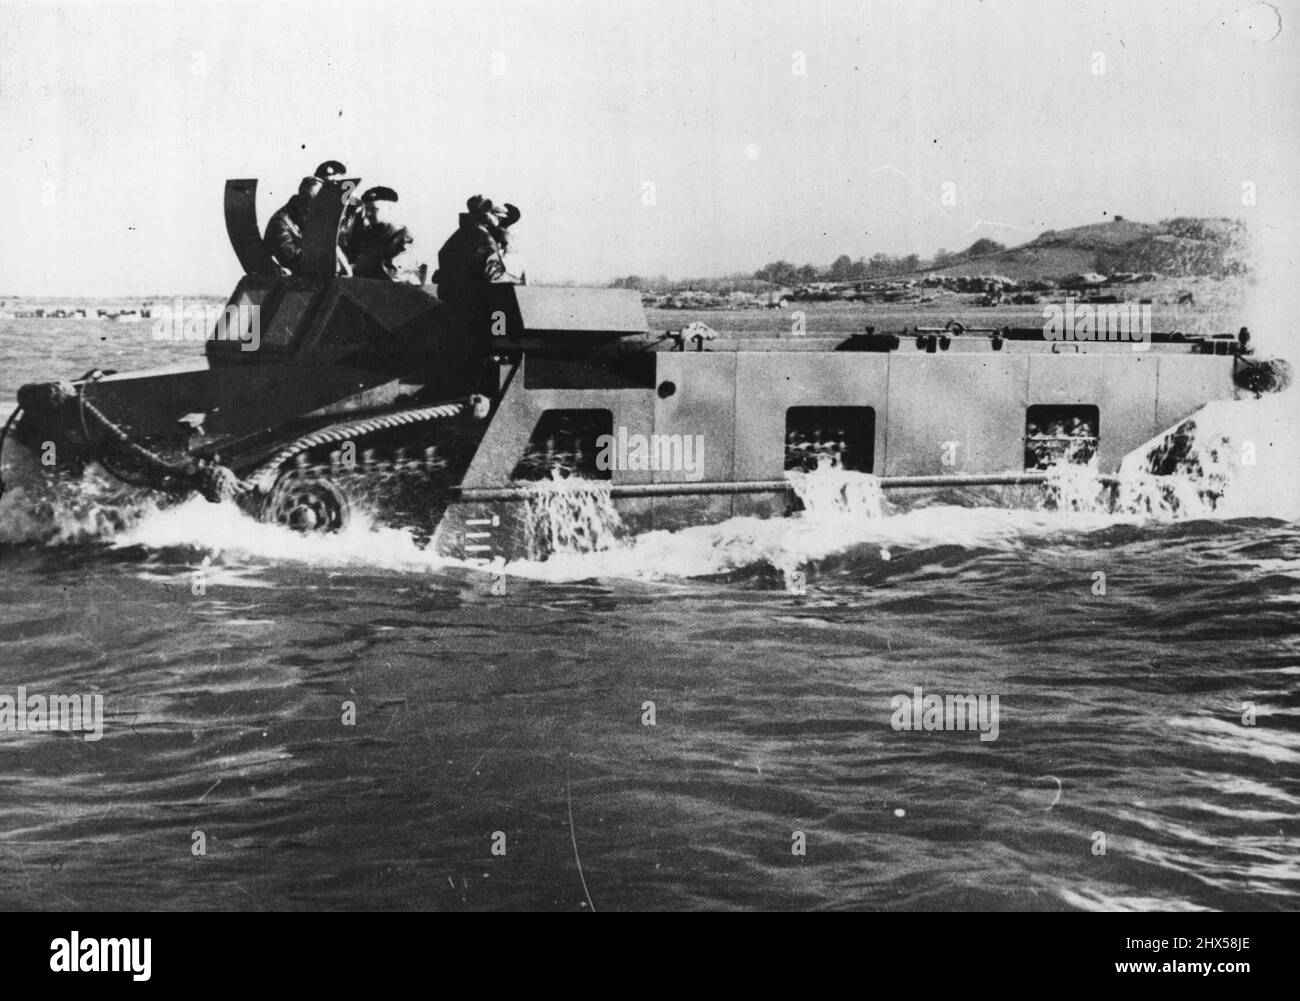 The Neptune Amphibious Tank -- 'Neptune' putting out to sea. This British tracked amphibious vehicle is a ship-to-shore load carrier capable of self-propulsion in any sea, able to land on a beach through heavy surf, and to move across country. 'Neptune' can take a pay load of approx; four tons and has a large unobstructed hold, which makes it particularly suited for the carriage of a wide variety of equipment, including the 17-pounder anti-tank and 25 pounder filed guns, vehicles, casulaties, and stores. 'Neptune' is equipped with navigation lights in addition to normal road lamps, a wireless Stock Photo